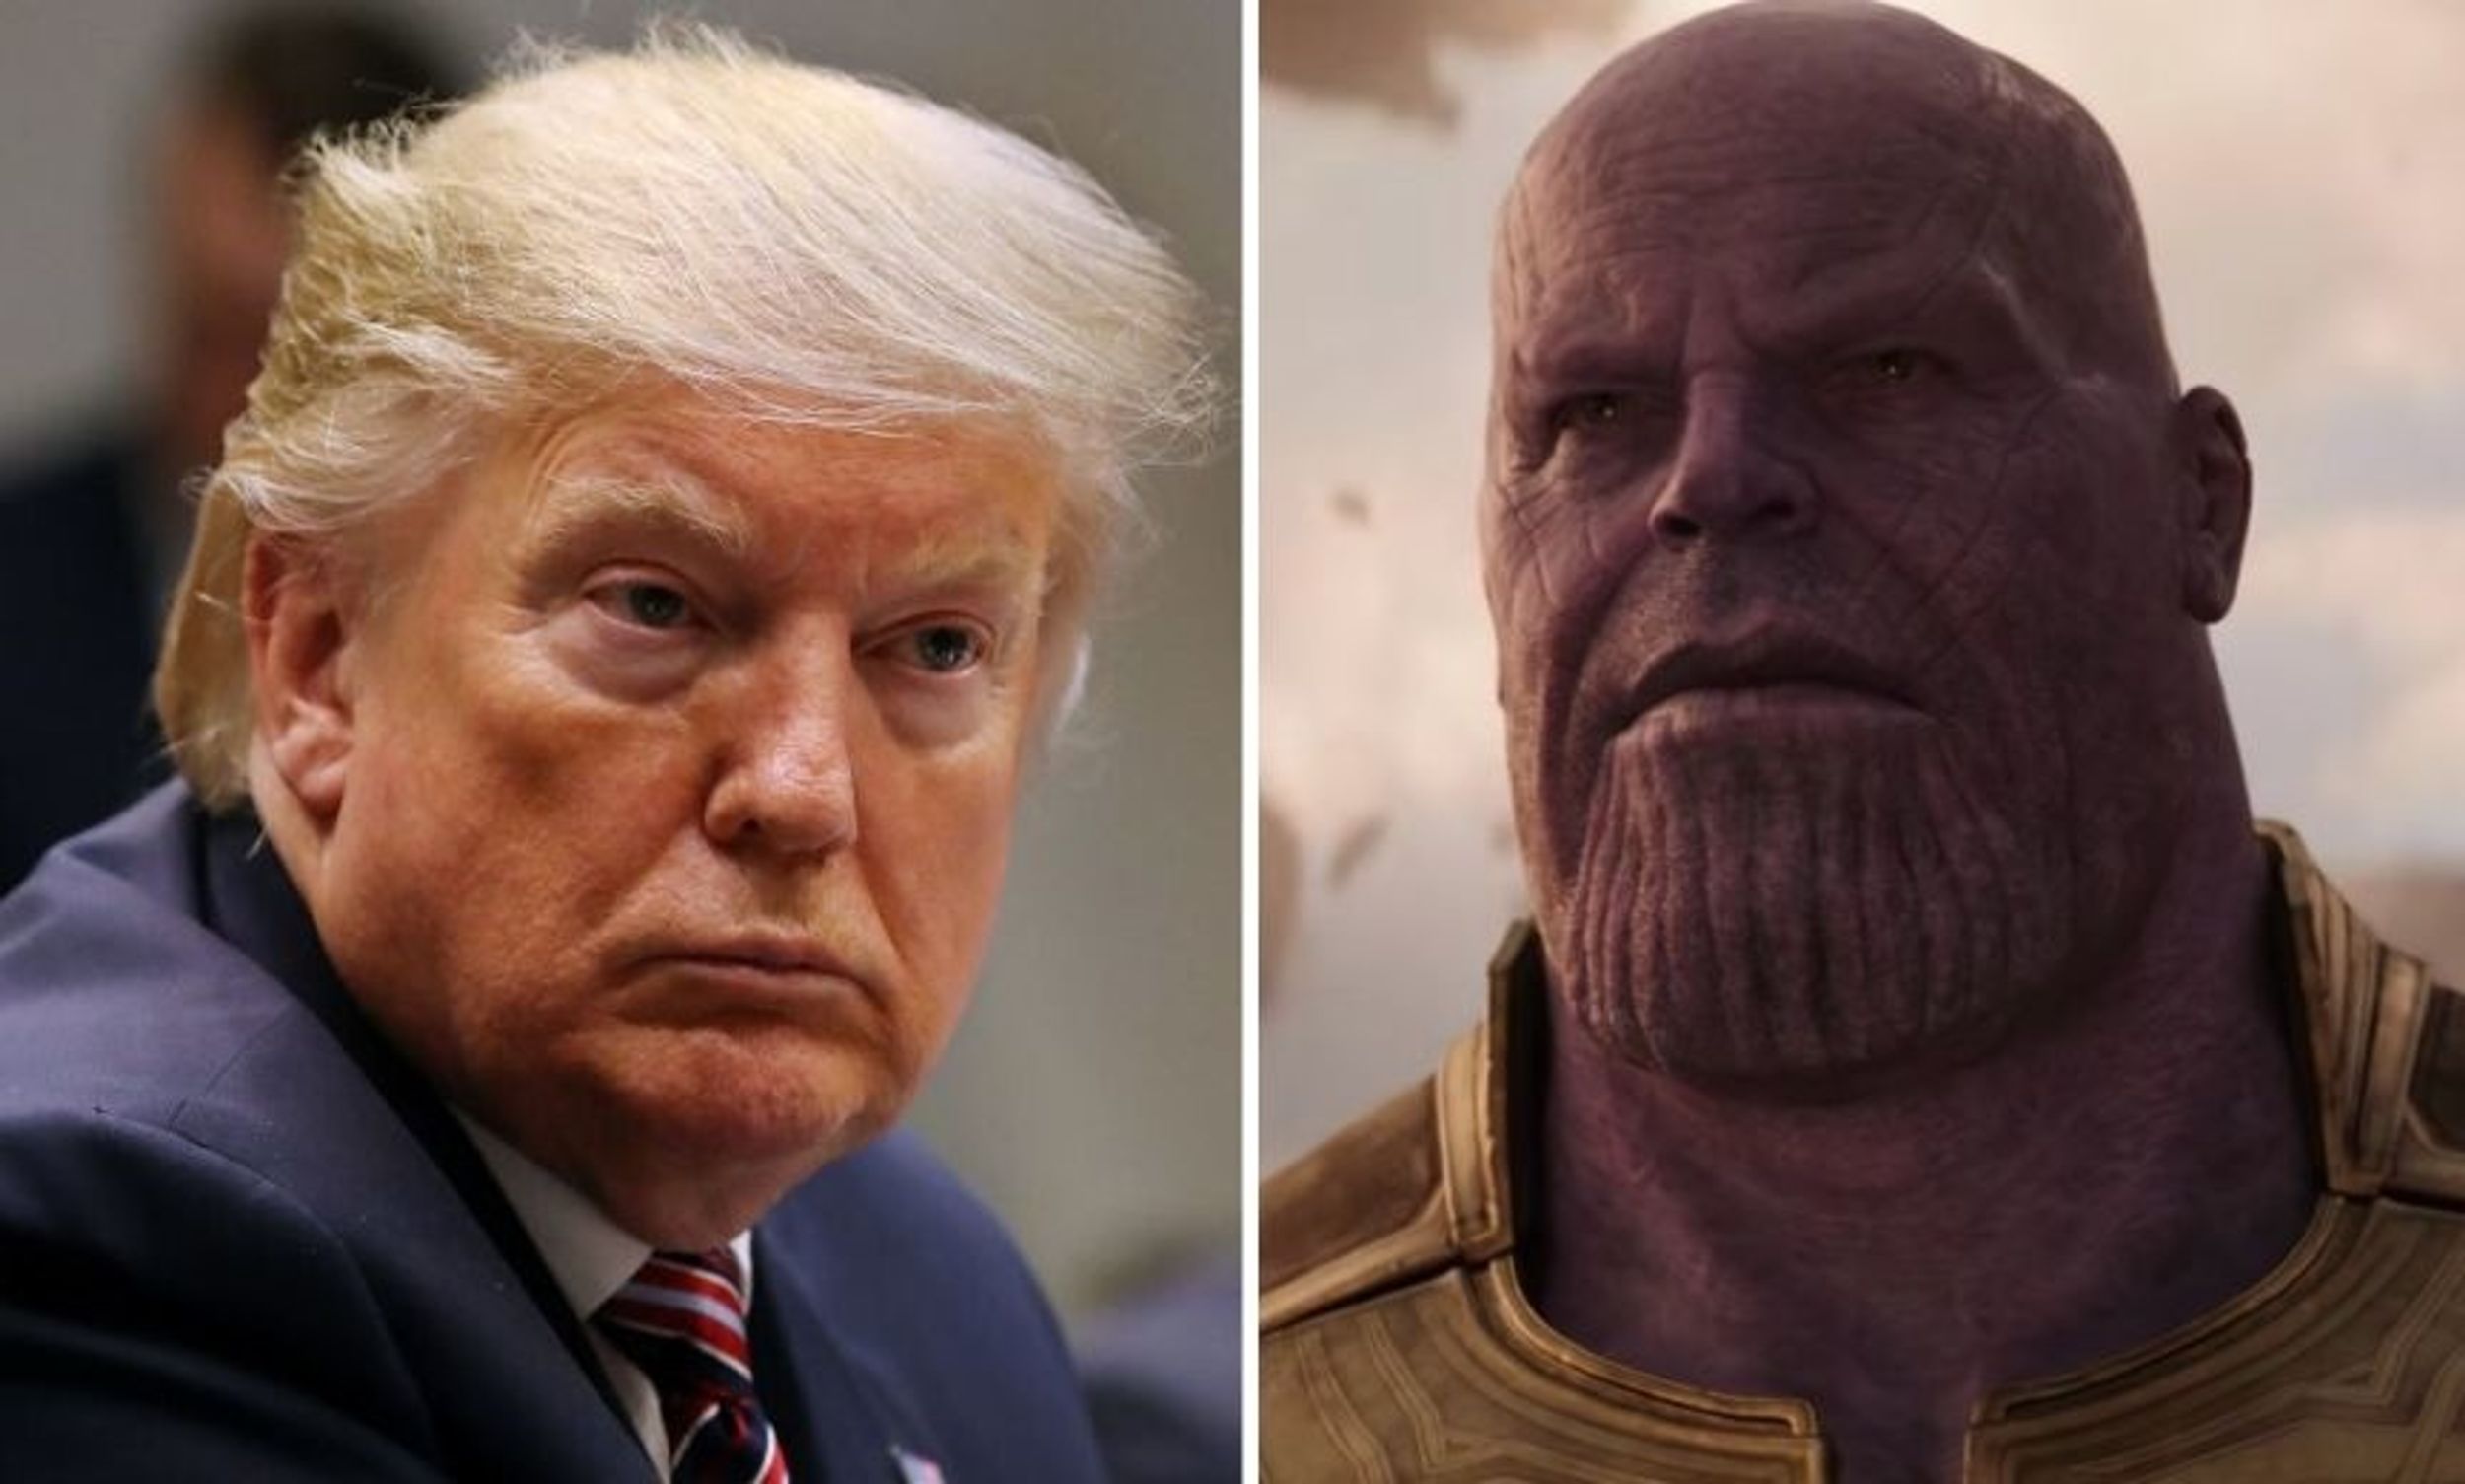 Trump Campaign Tweets Bizarre Video of Trump as Thanos from 'Avengers: Endgame'